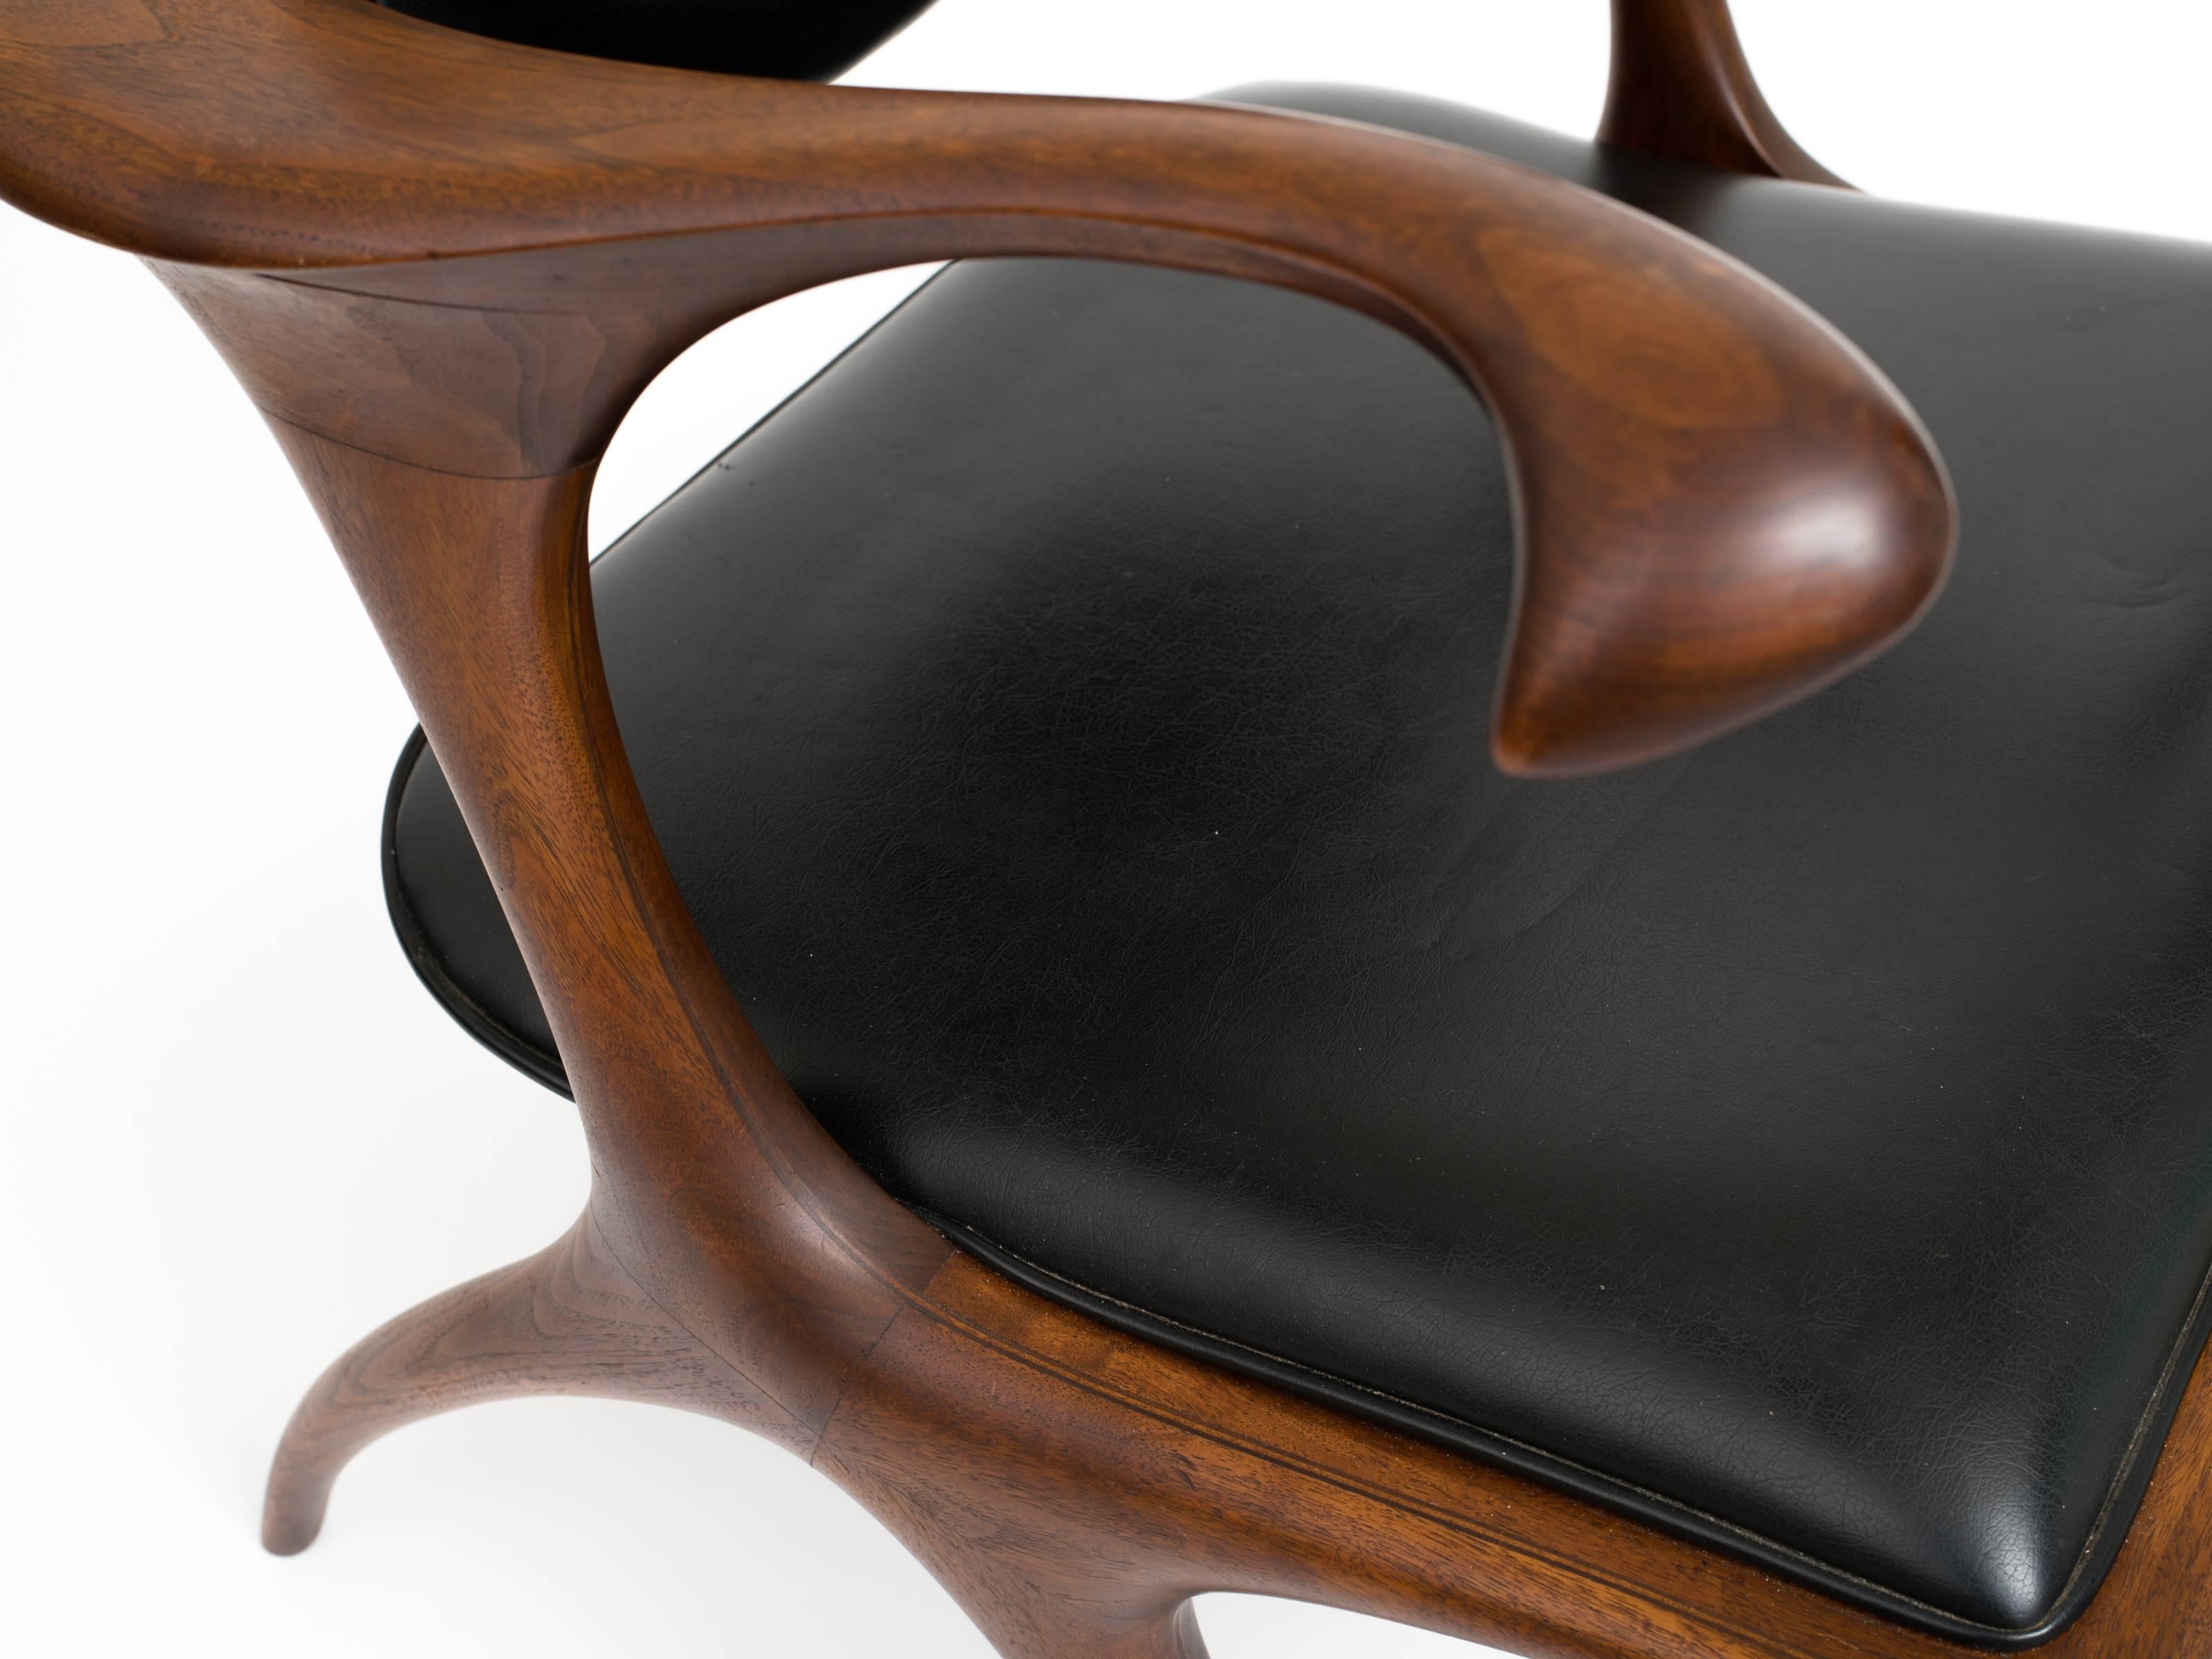 Mid-20th Century Early and Rare Evert Sodergren Sculptured Chair, circa 1955 For Sale